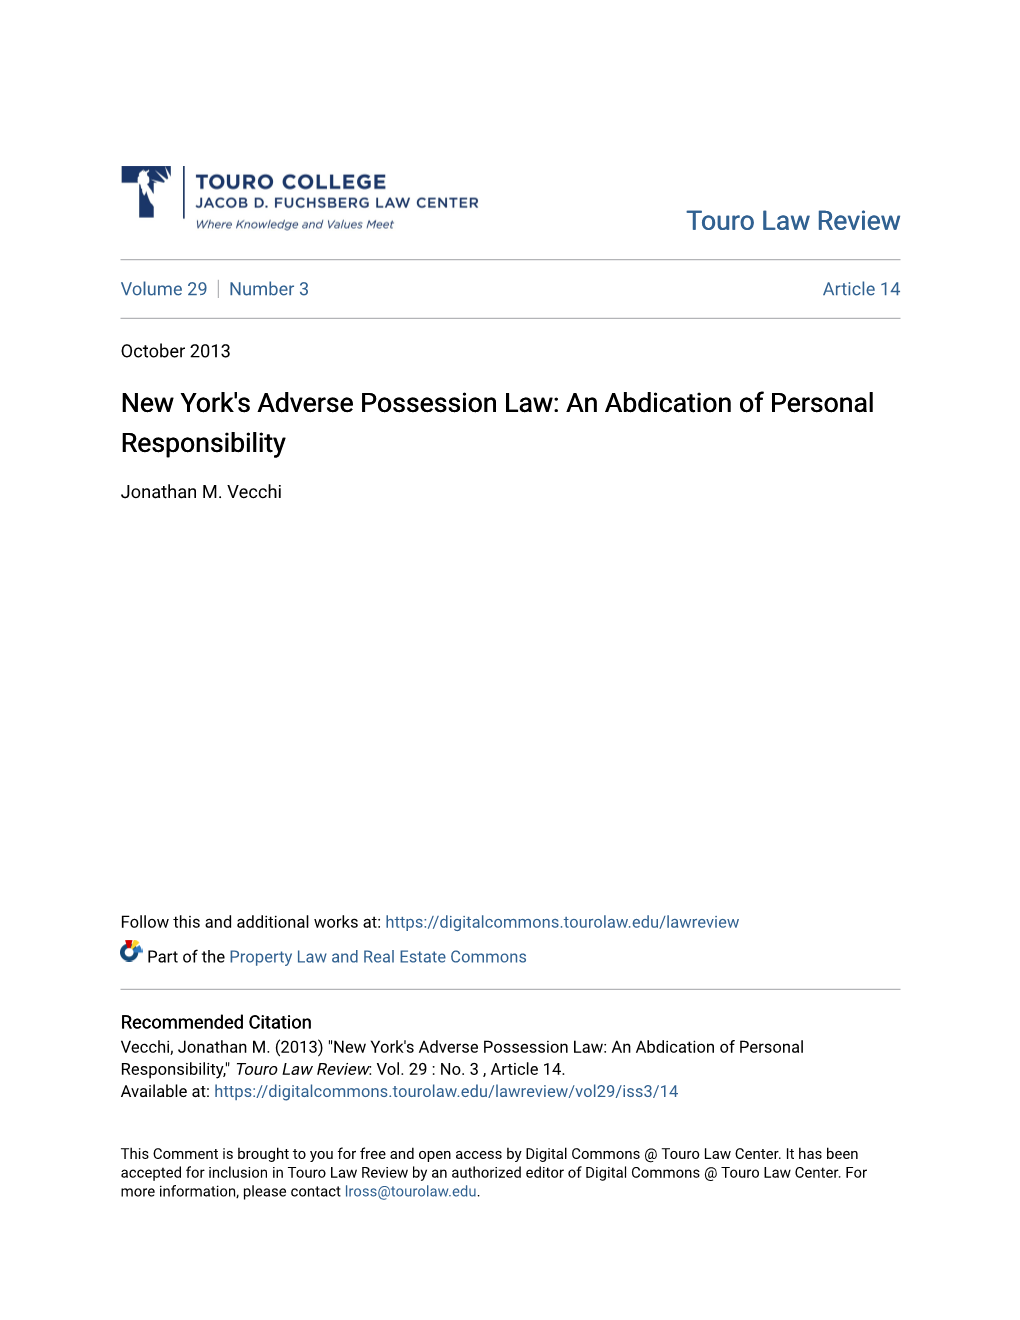 New York's Adverse Possession Law: an Abdication of Personal Responsibility